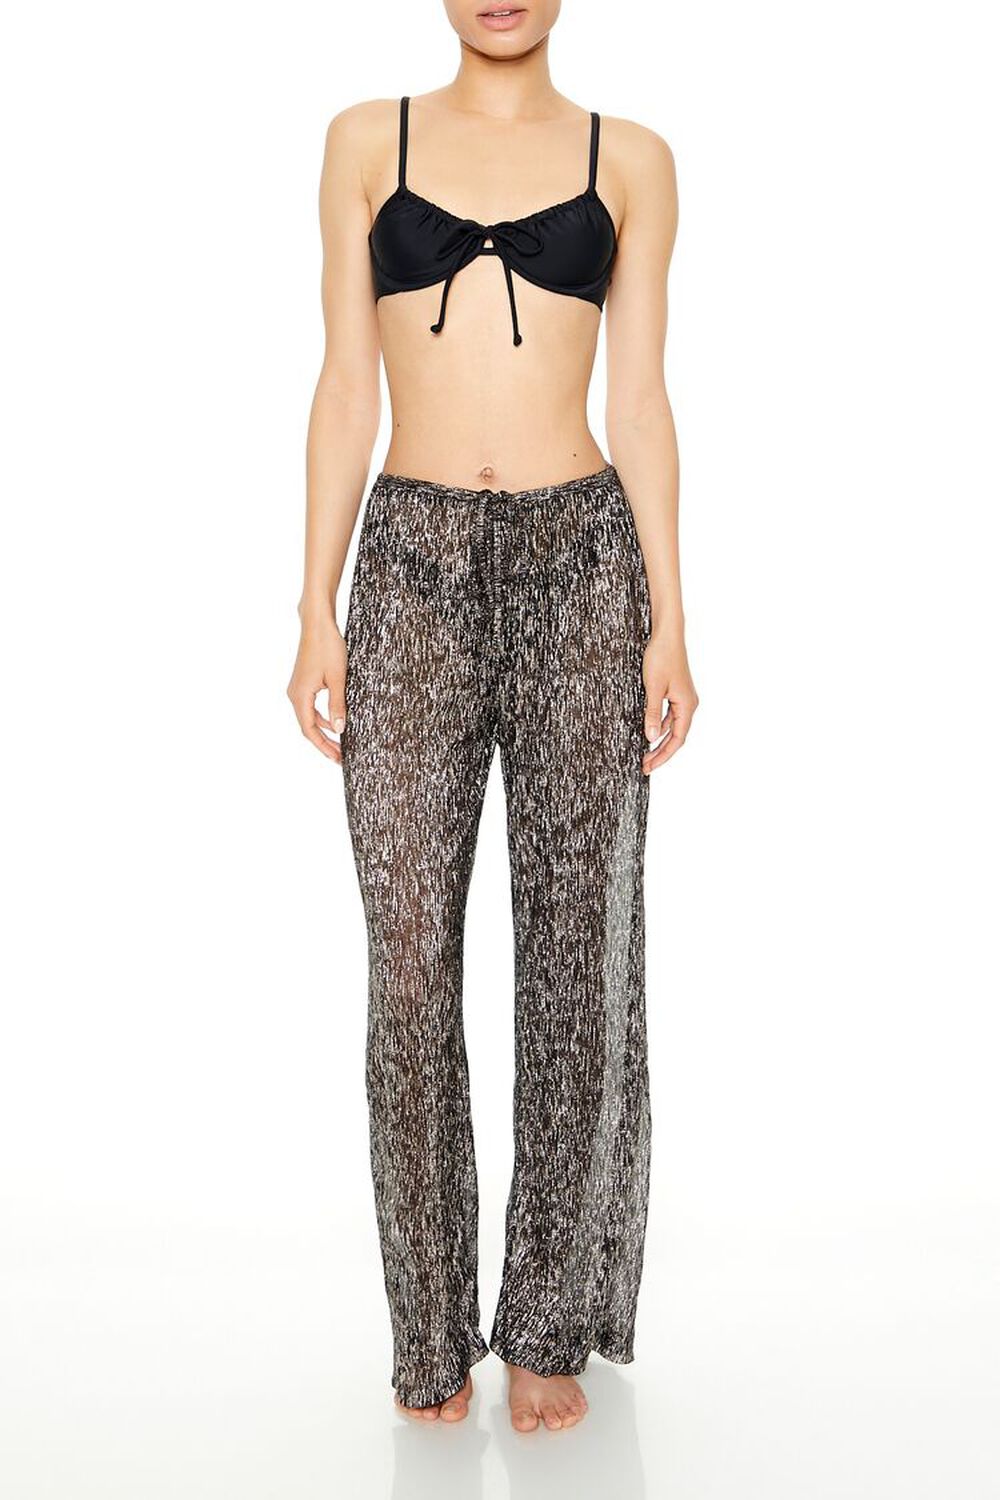 BLACK Shimmery Swim Cover-Up Pants, image 1